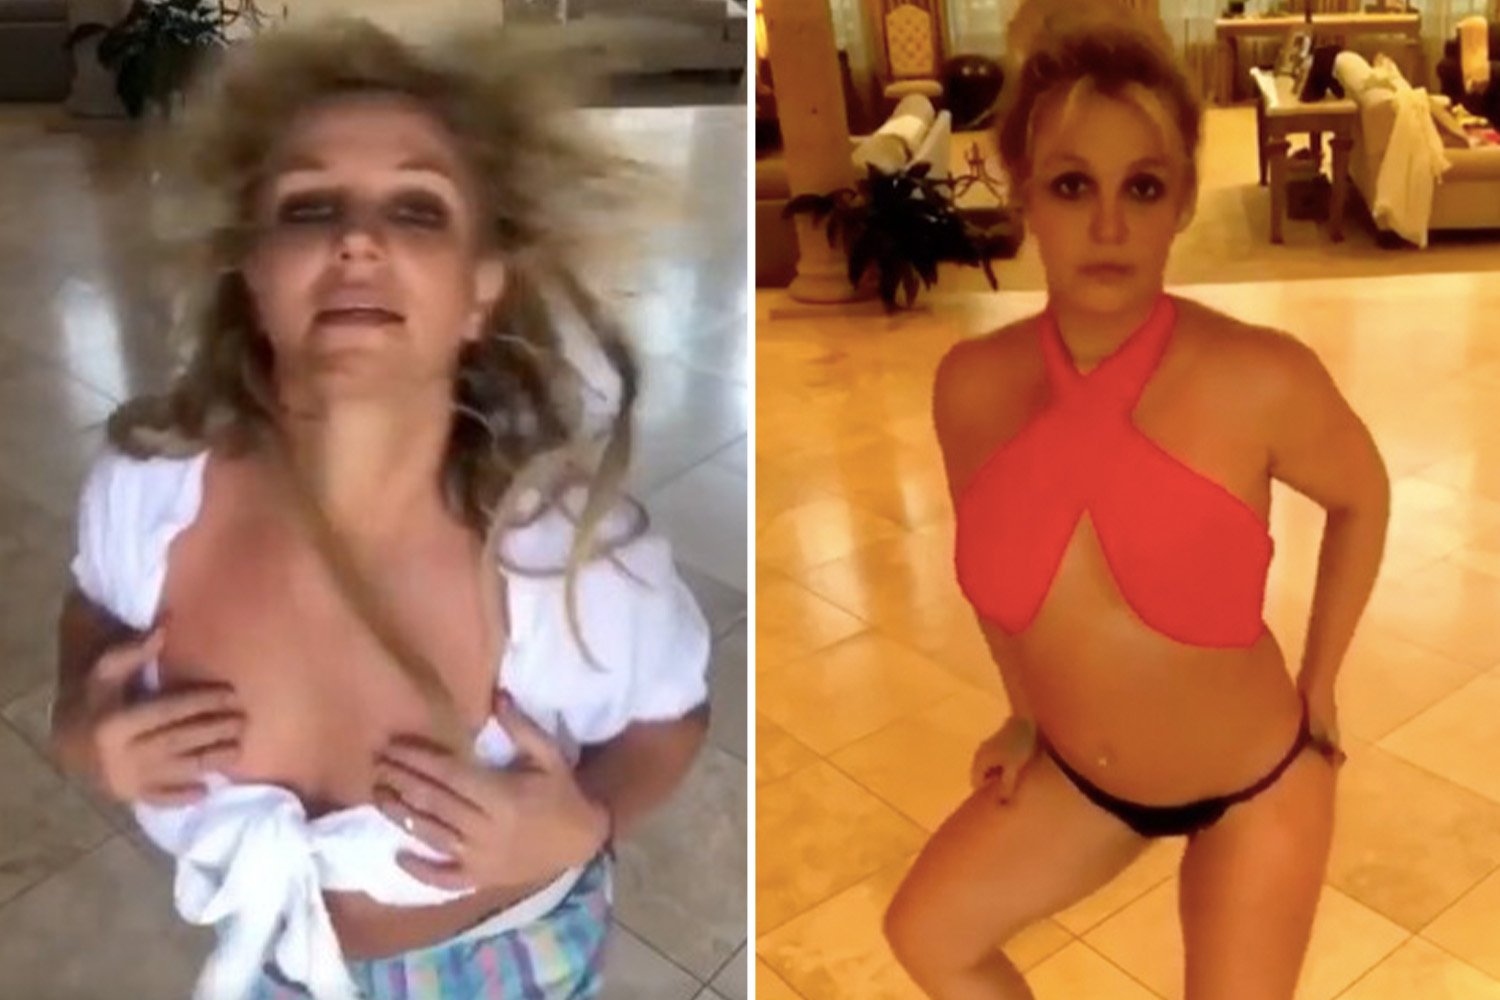 What are the dancing videos of Britney Spears and why are her fans concerned?